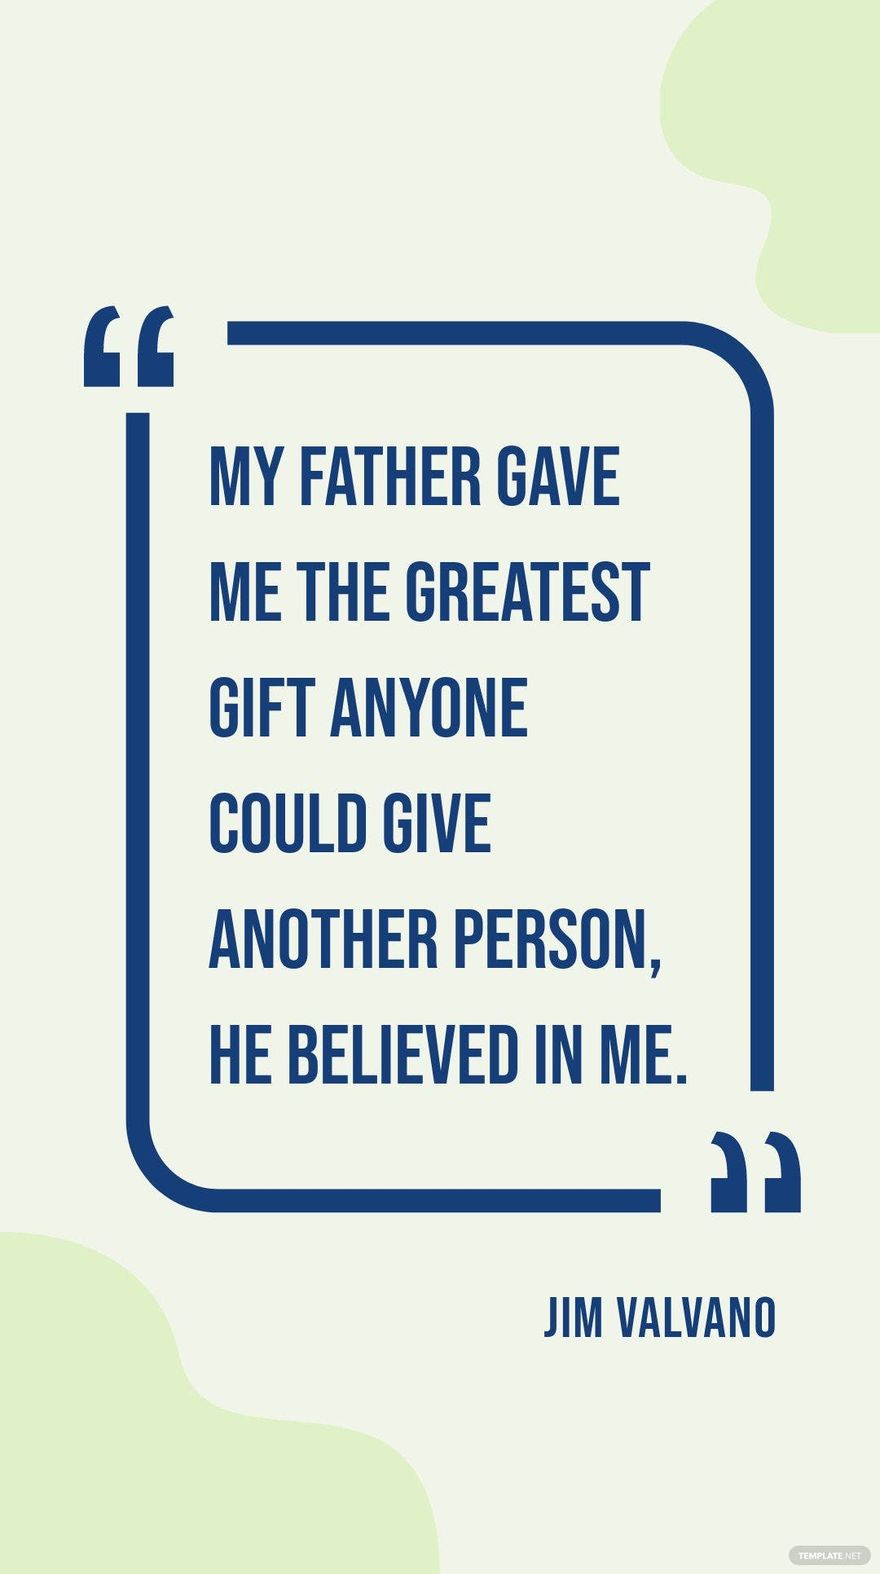 Jim Valvano - My father gave me the greatest gift anyone could give another person, he believed in me.